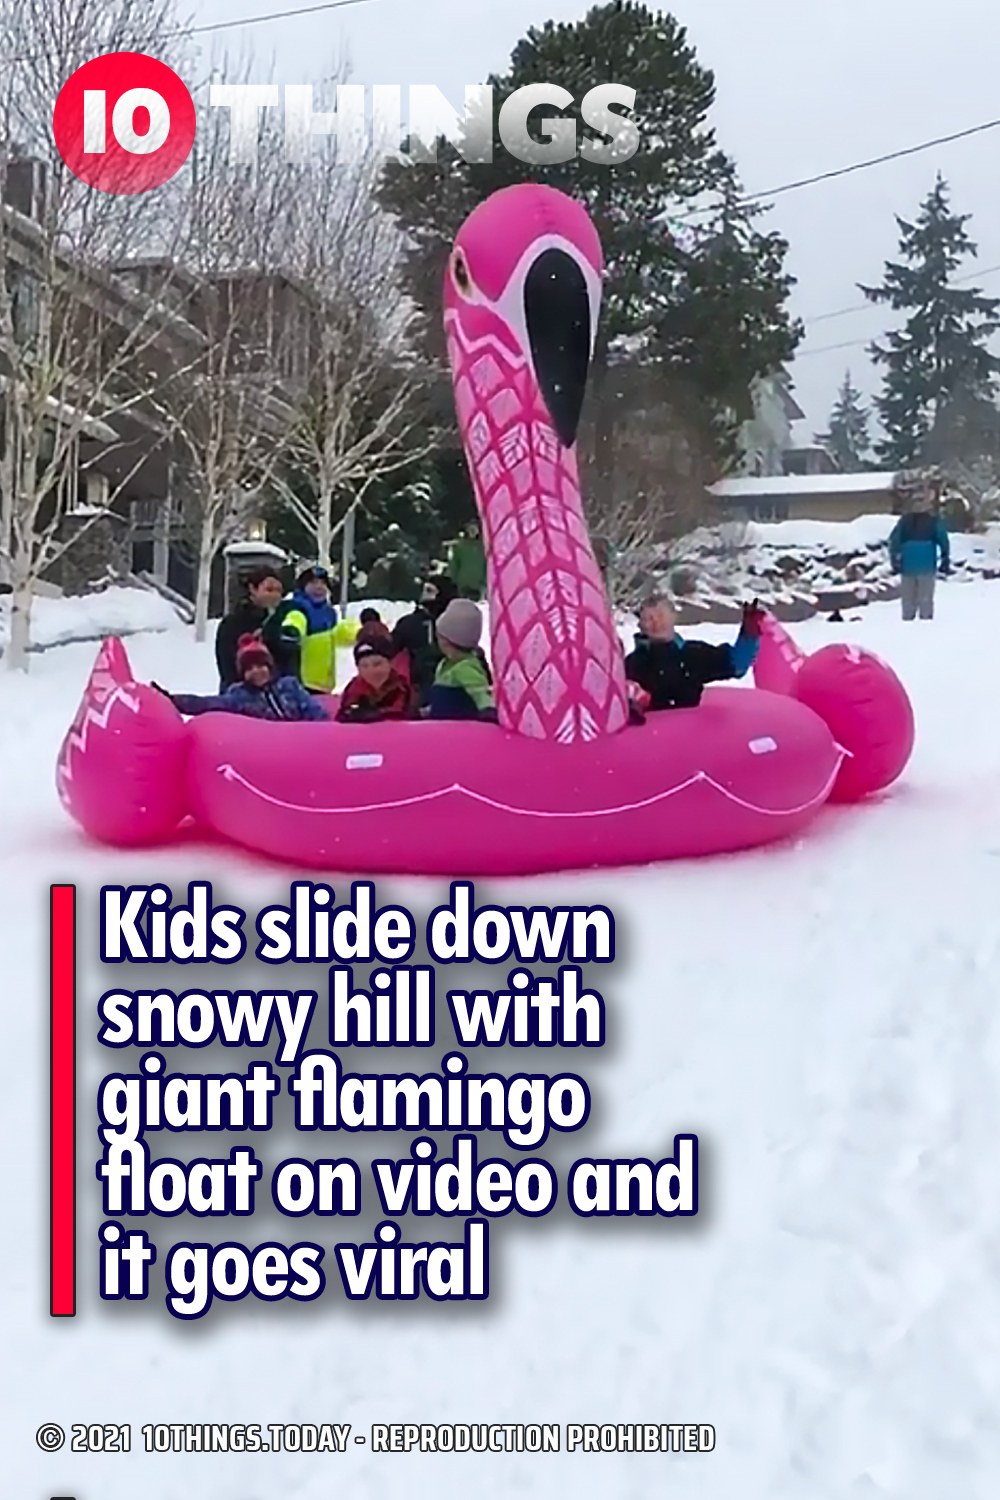 Kids slide down snowy hill with giant flamingo float on video and it goes viral